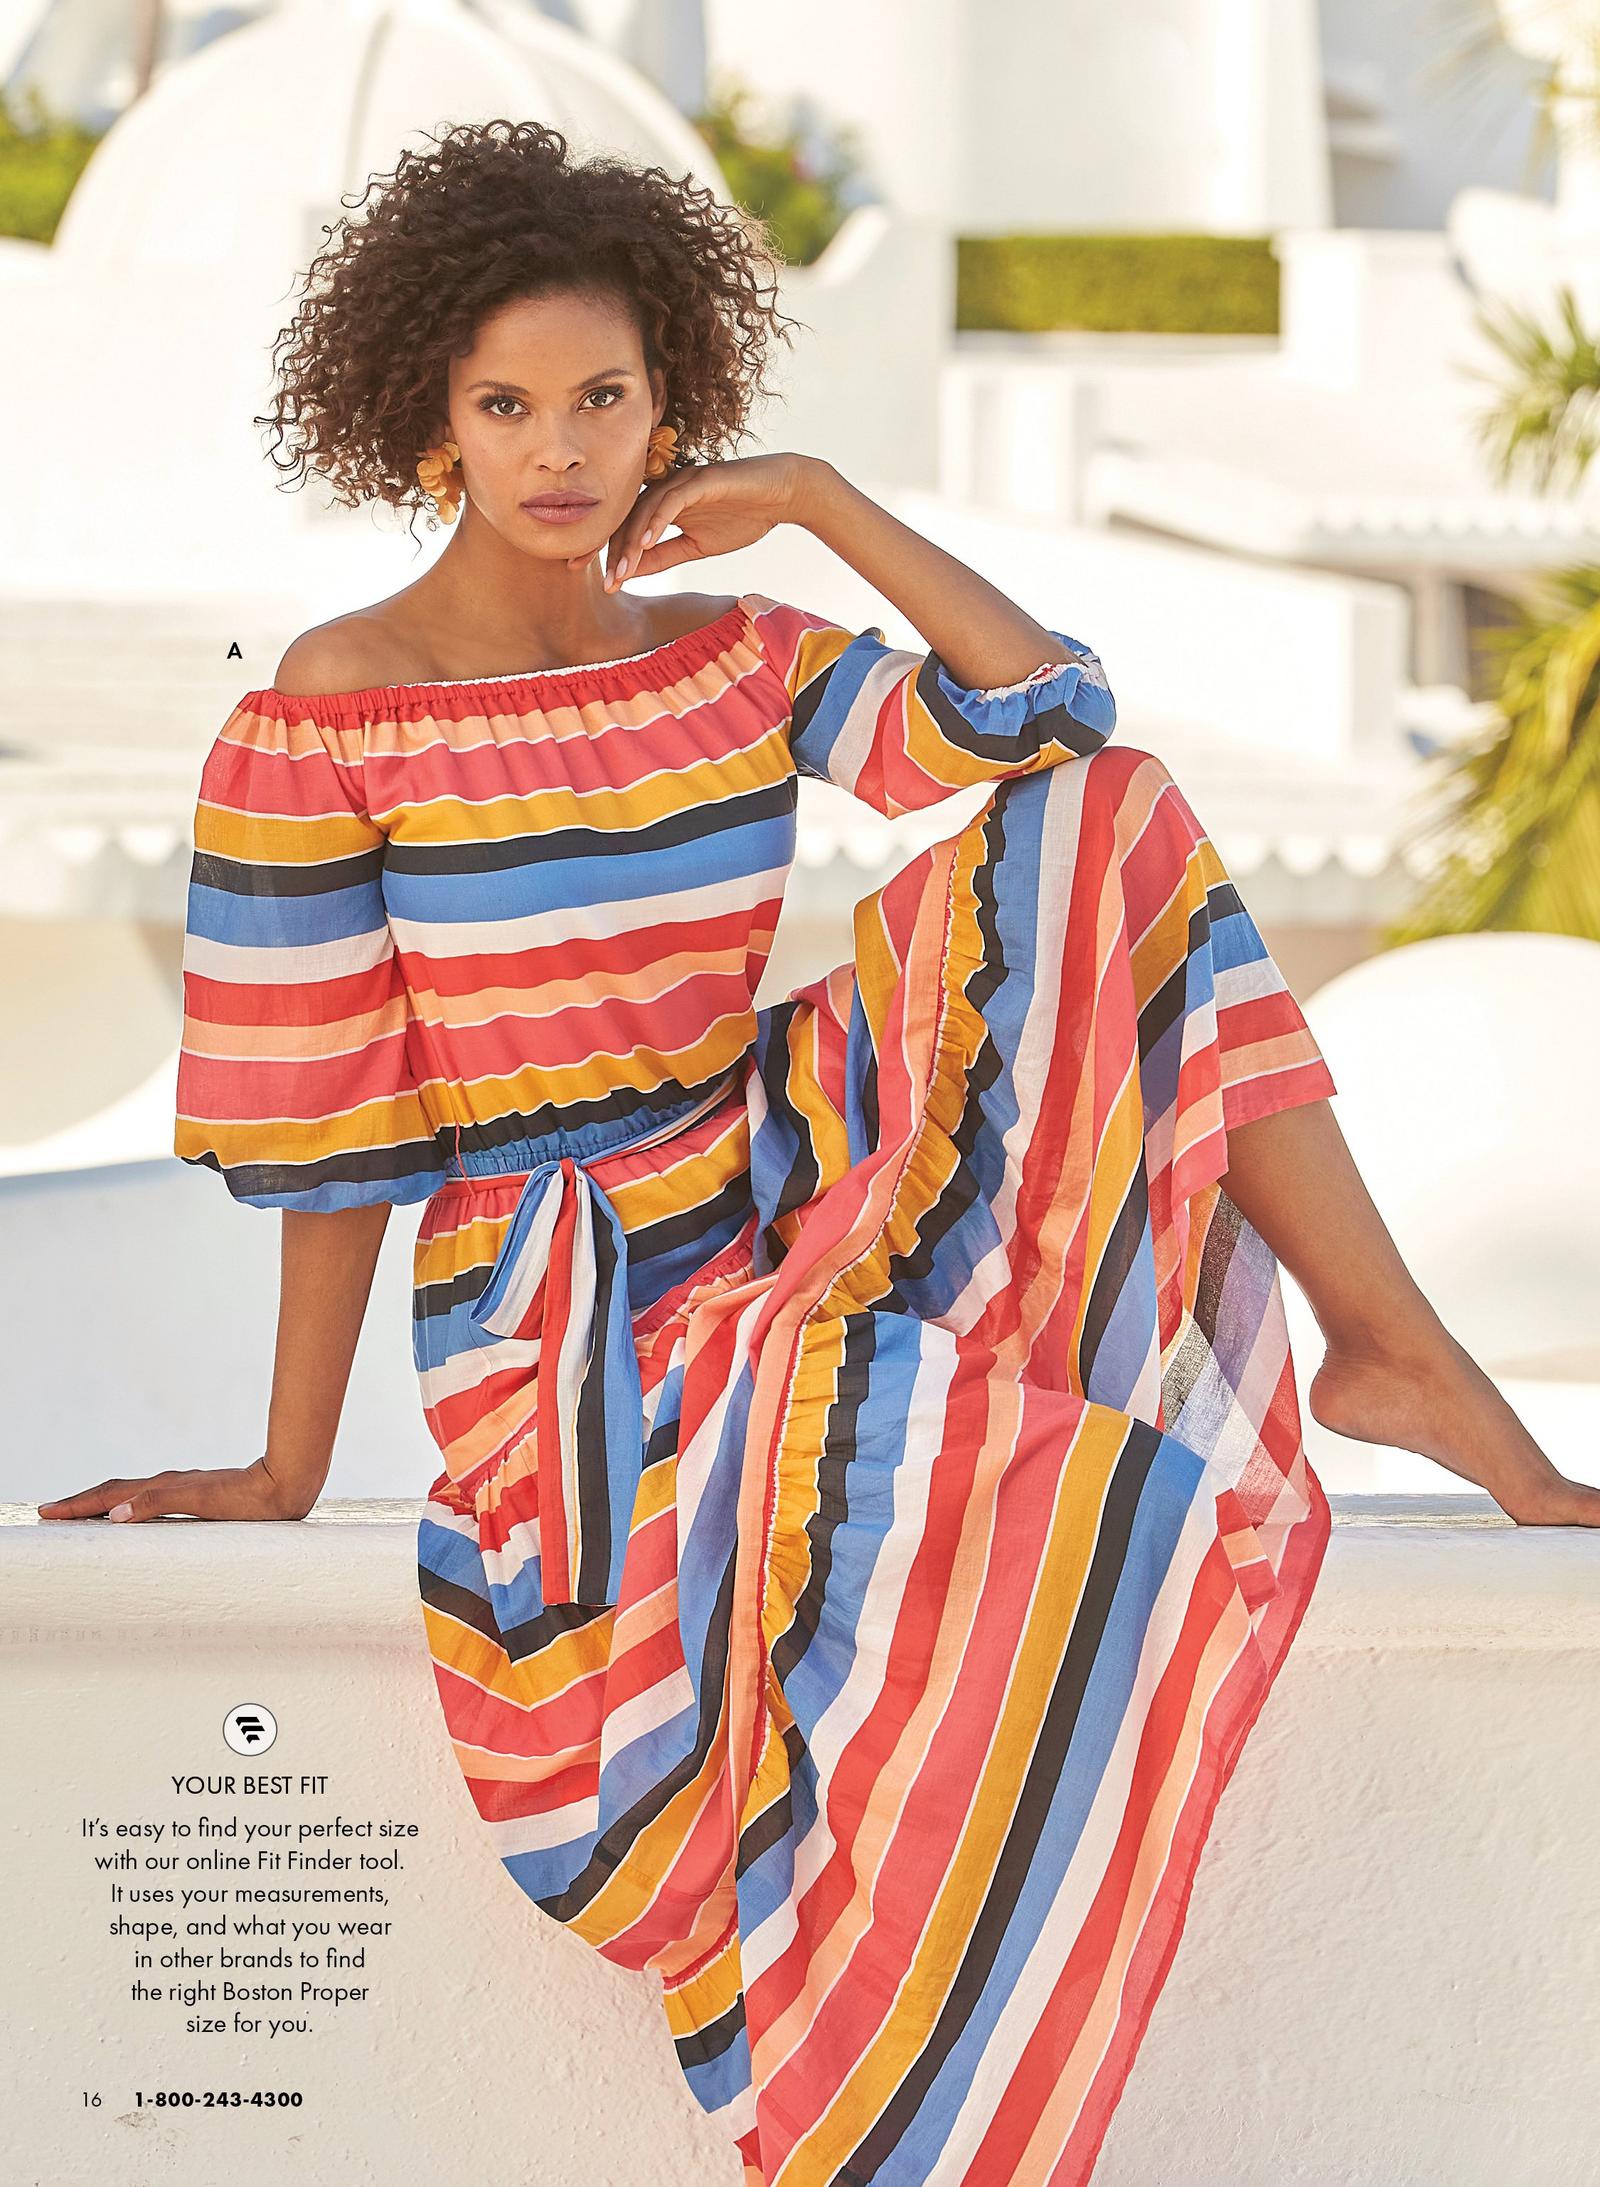 model wearing an off-the-shoulder multicolored stripe maxi dress.